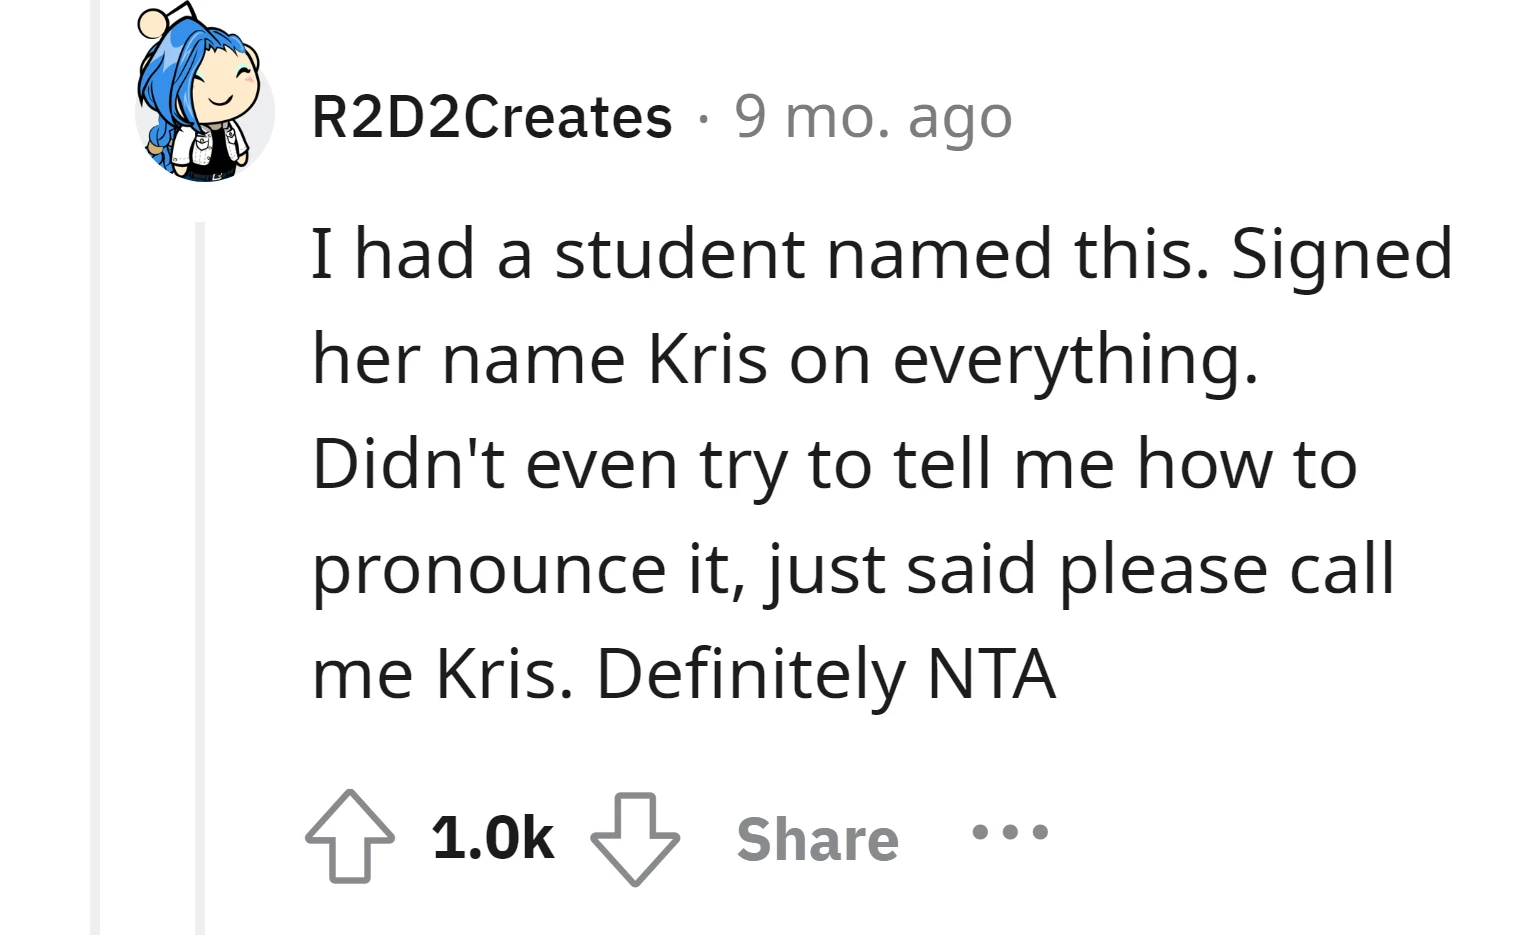 Commenter shares an experience with a student who had a similar unconventional name